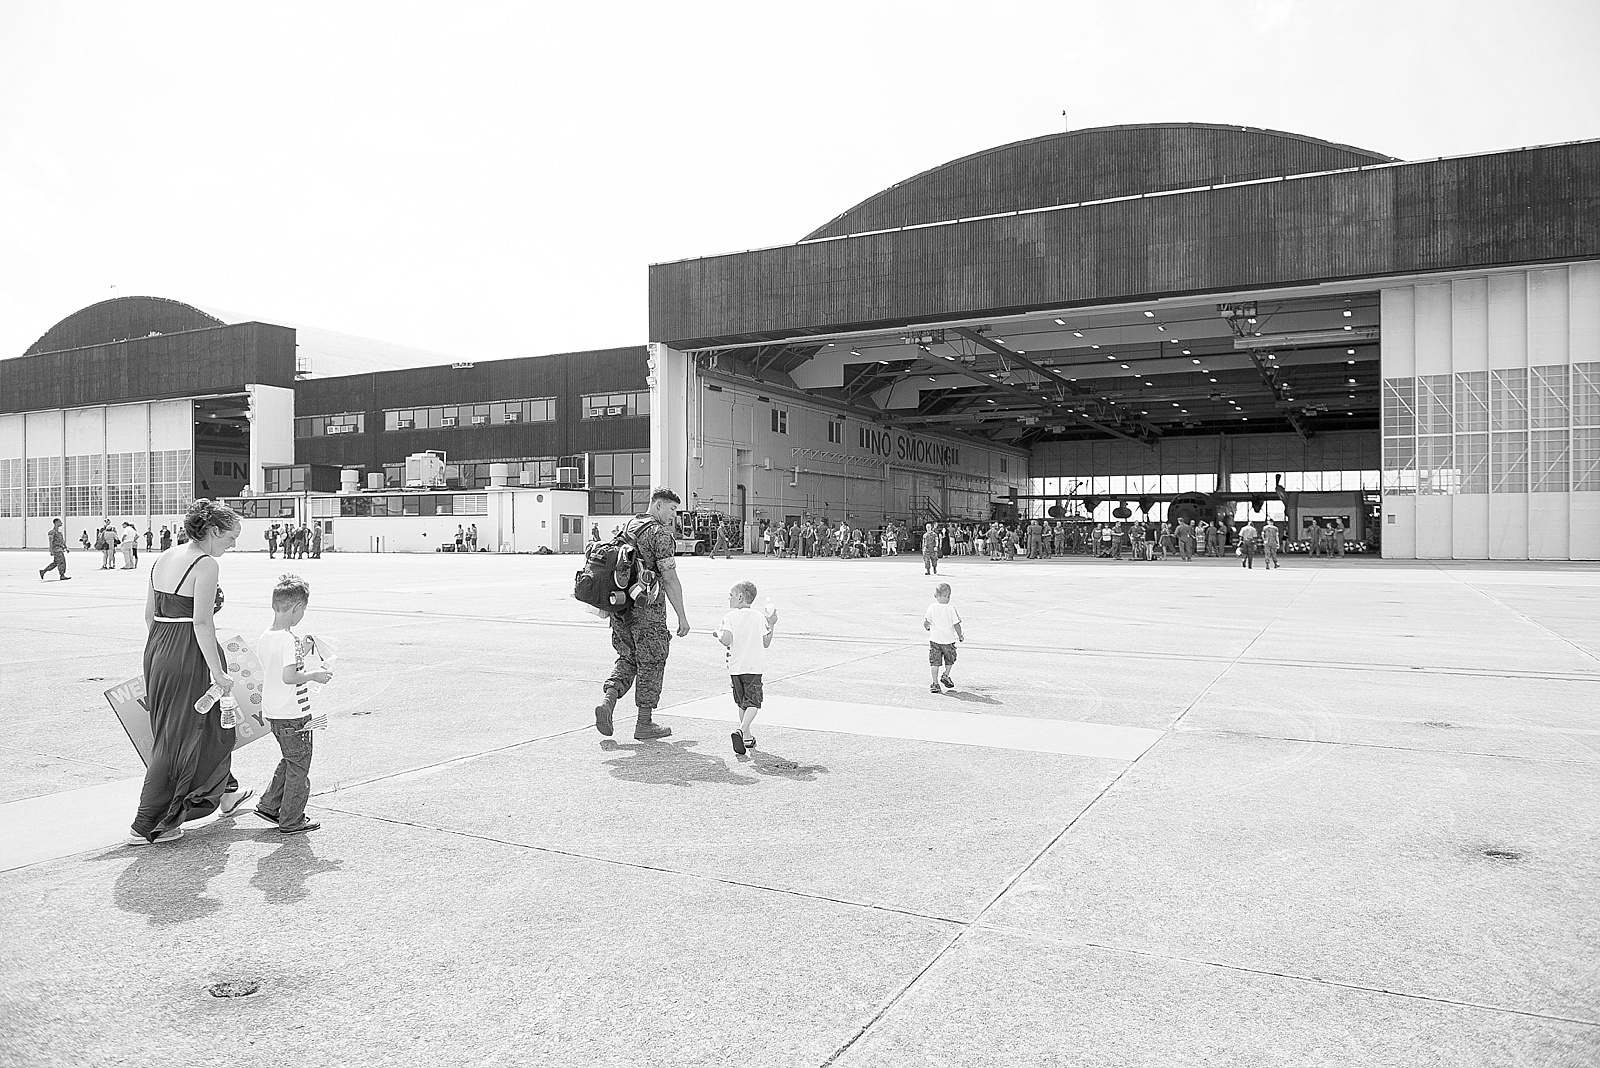 Marine Corps C-130 homecoming photography at MCAS Cherry Point from North Carolina portrait photographer Lauren Nygard